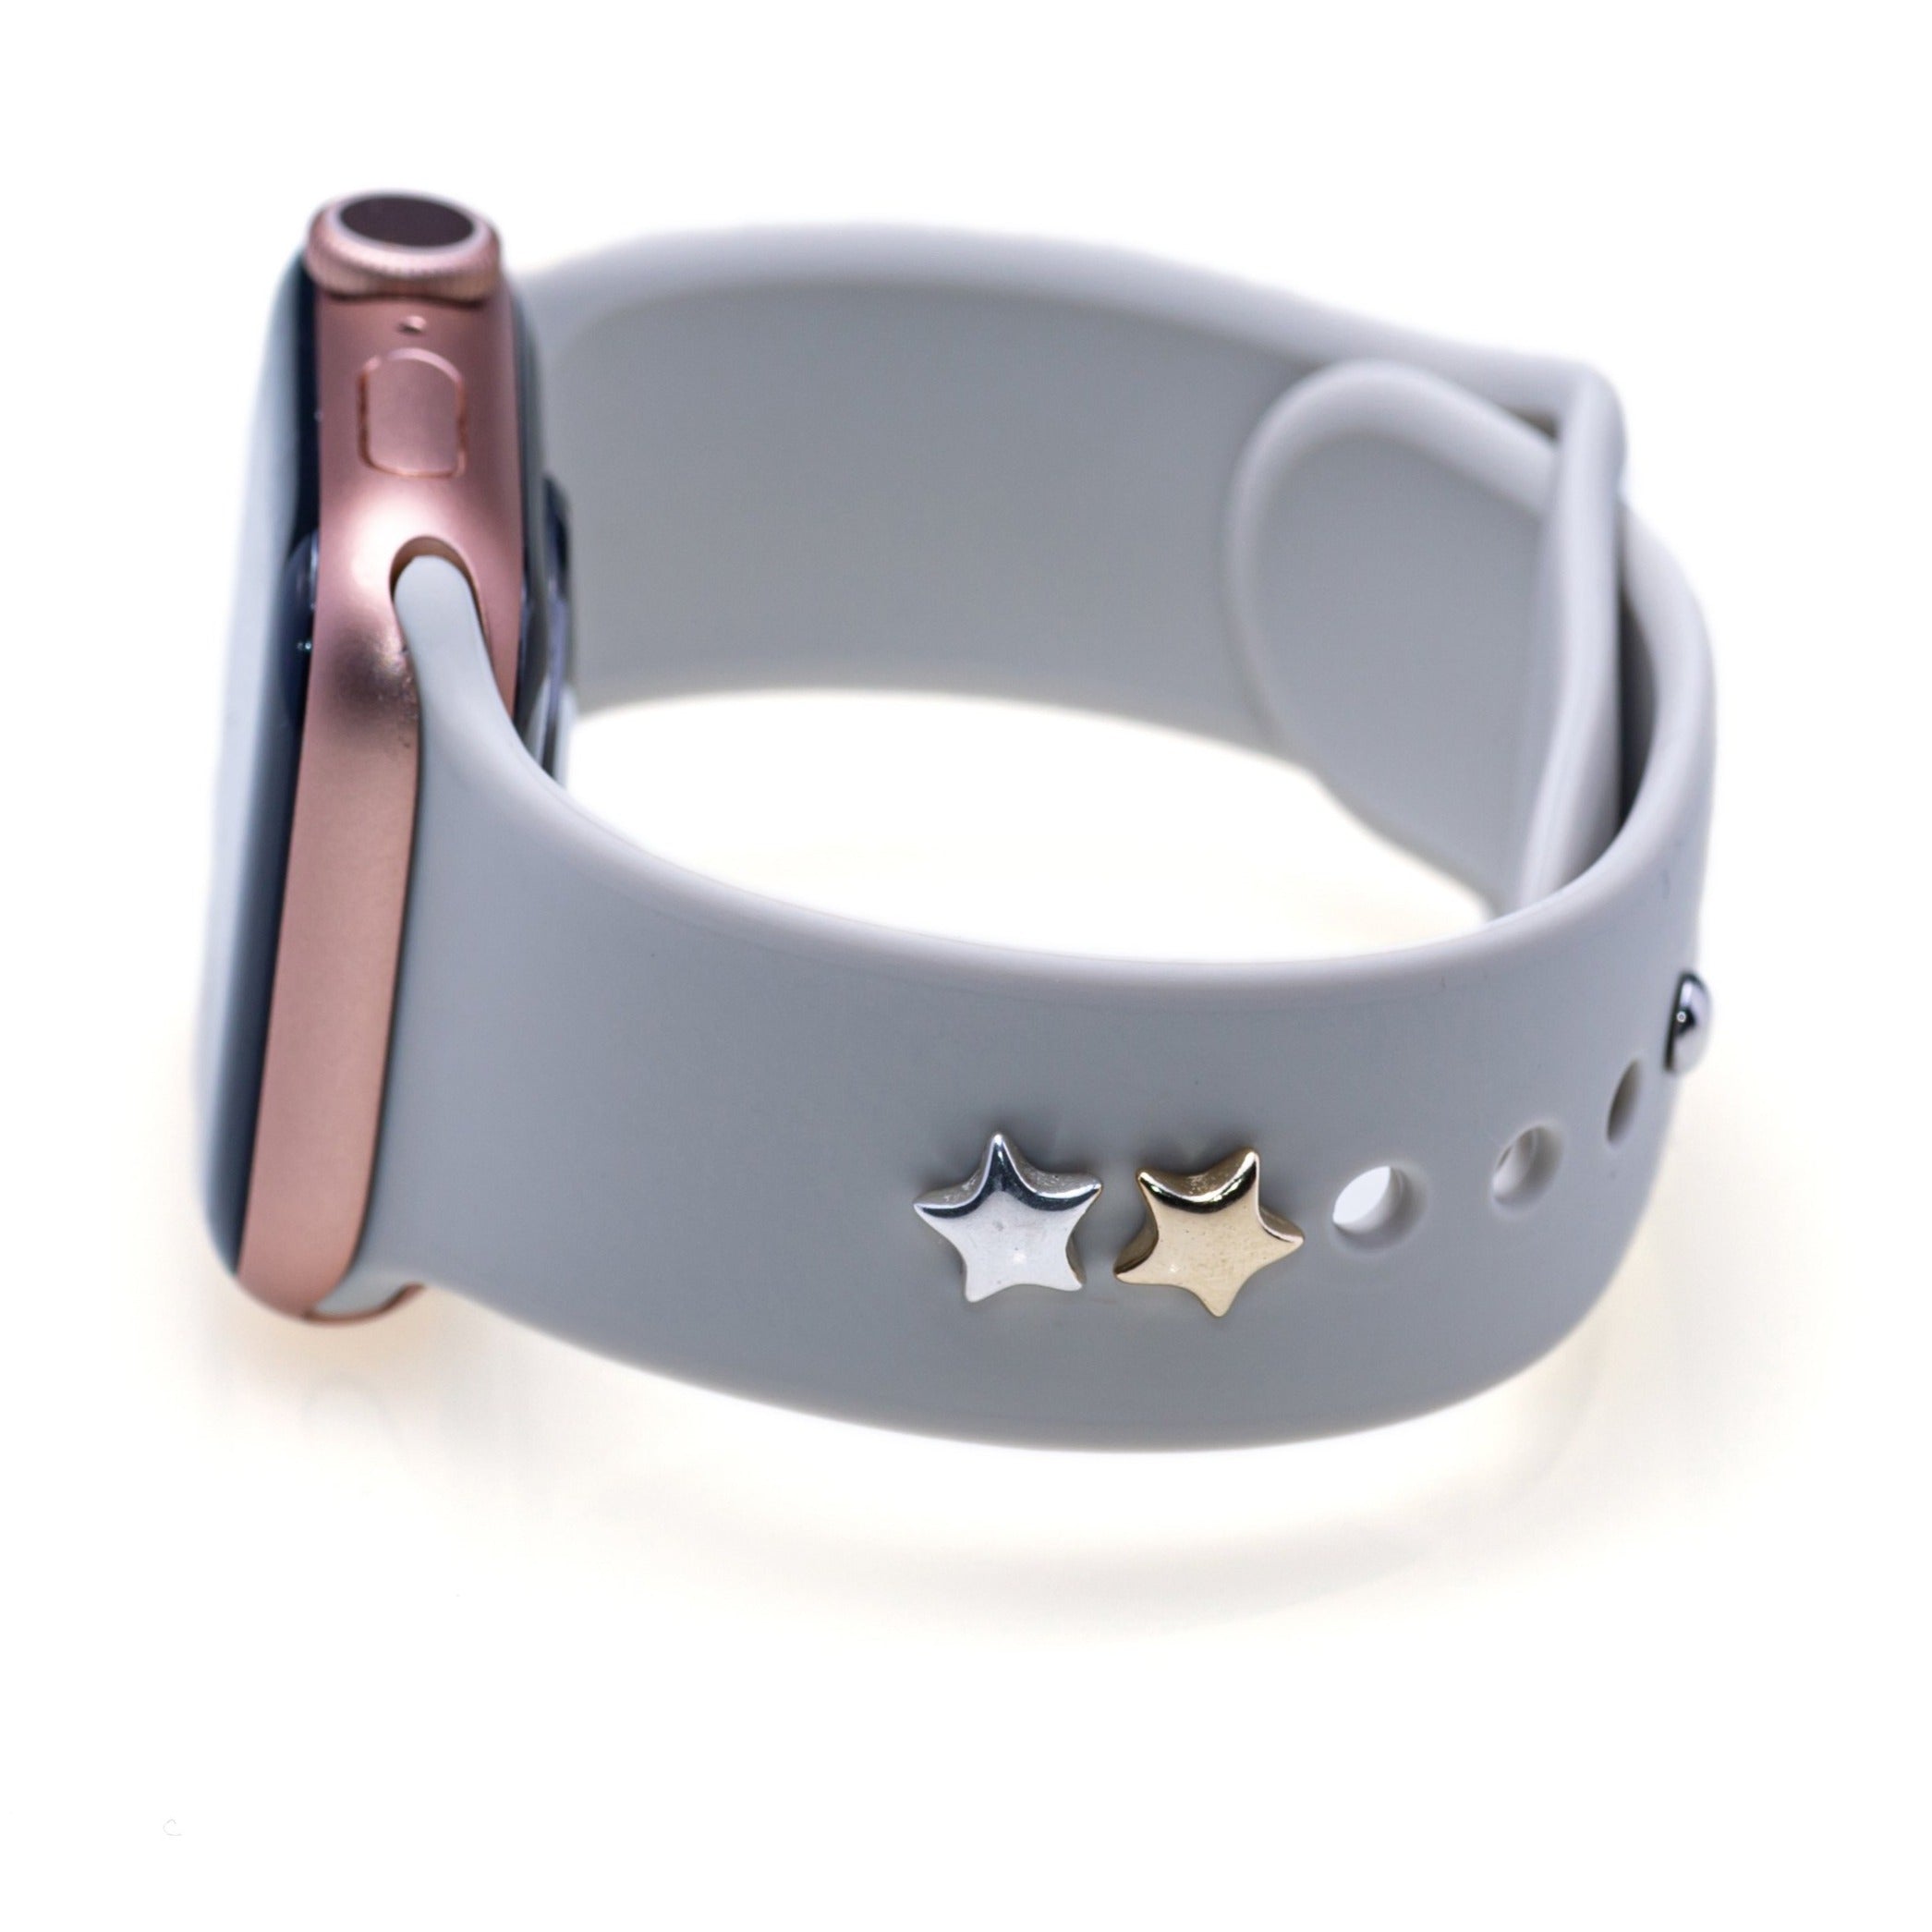 Star Cuff Accessory for Apple Watch Band